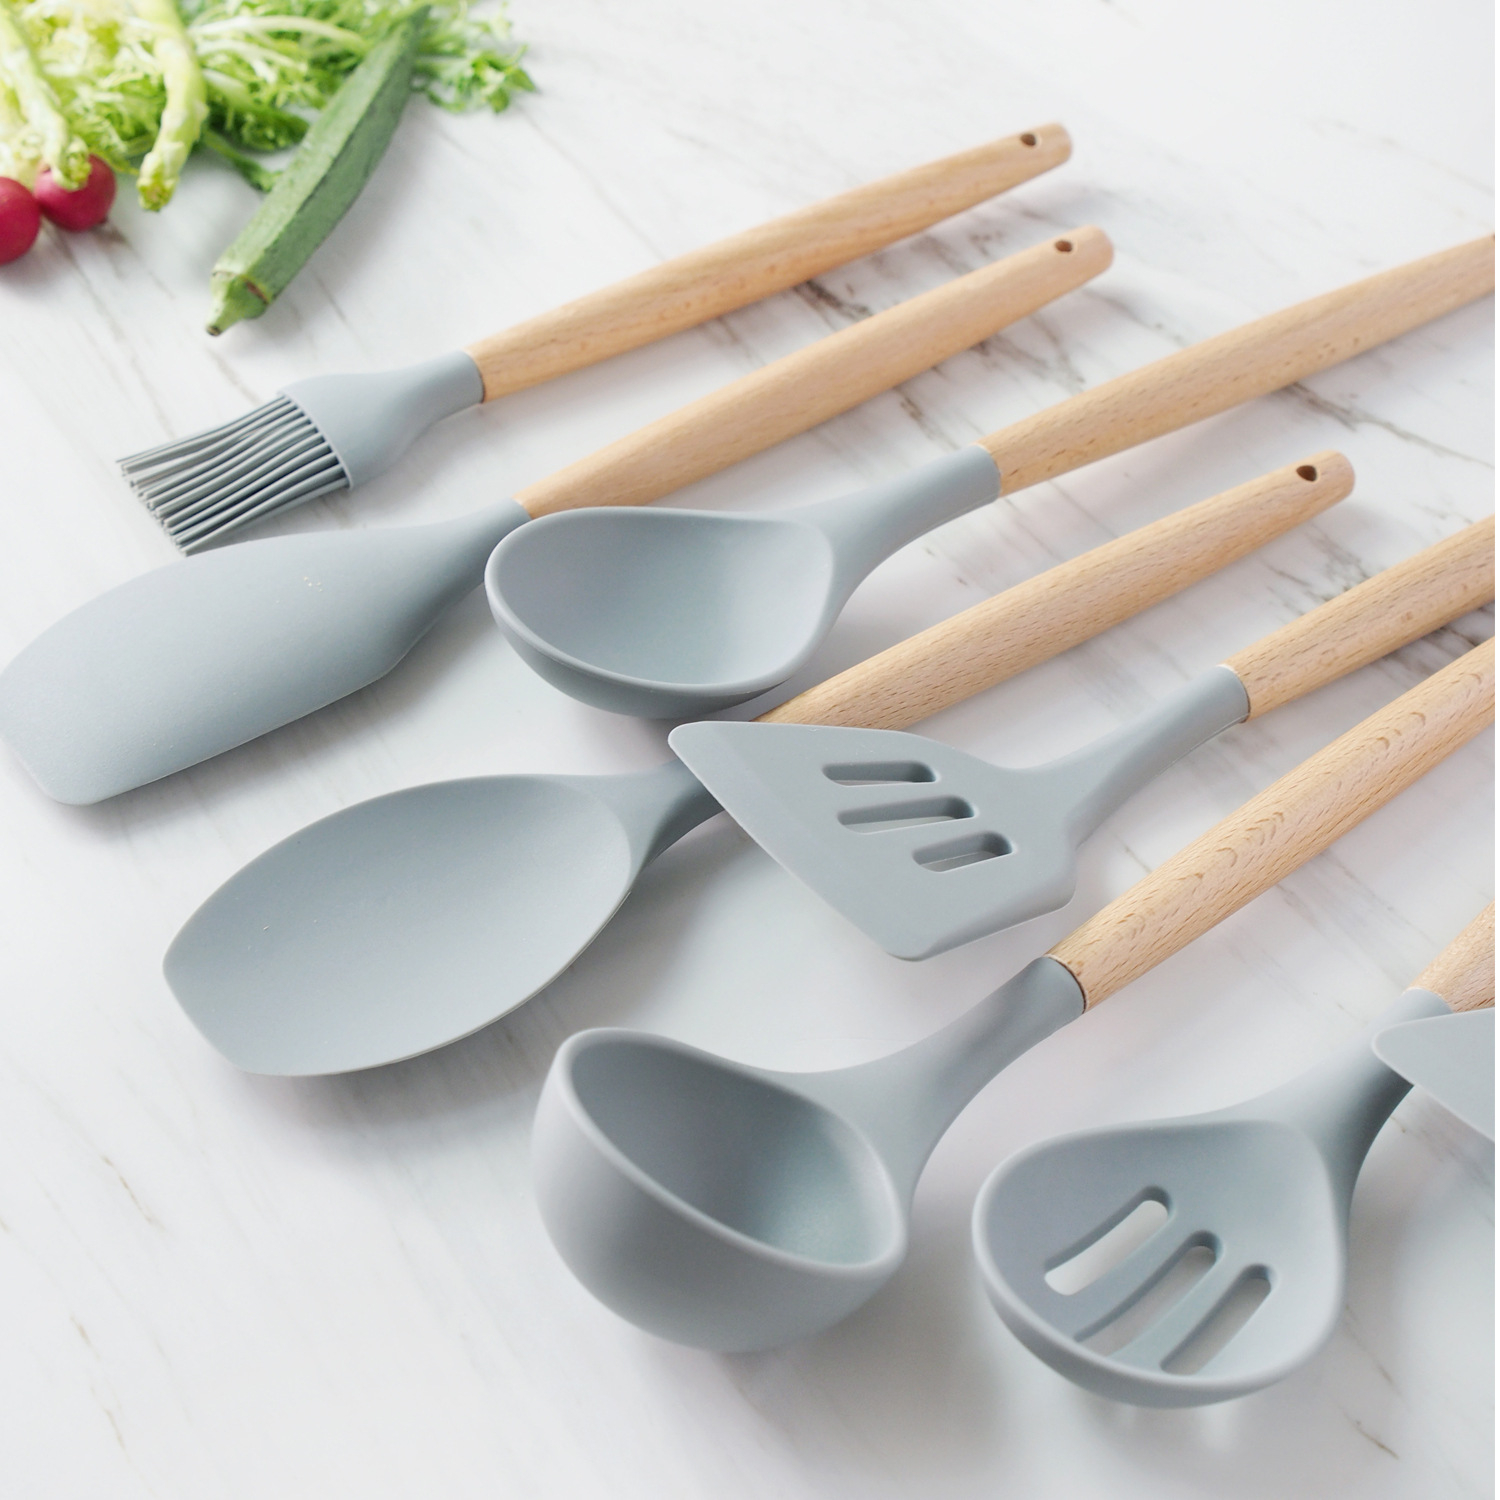 Beech wood utensil serving spaghetti slotted spatula silicone cooking spoon set with wooden long handle holder for kitchen